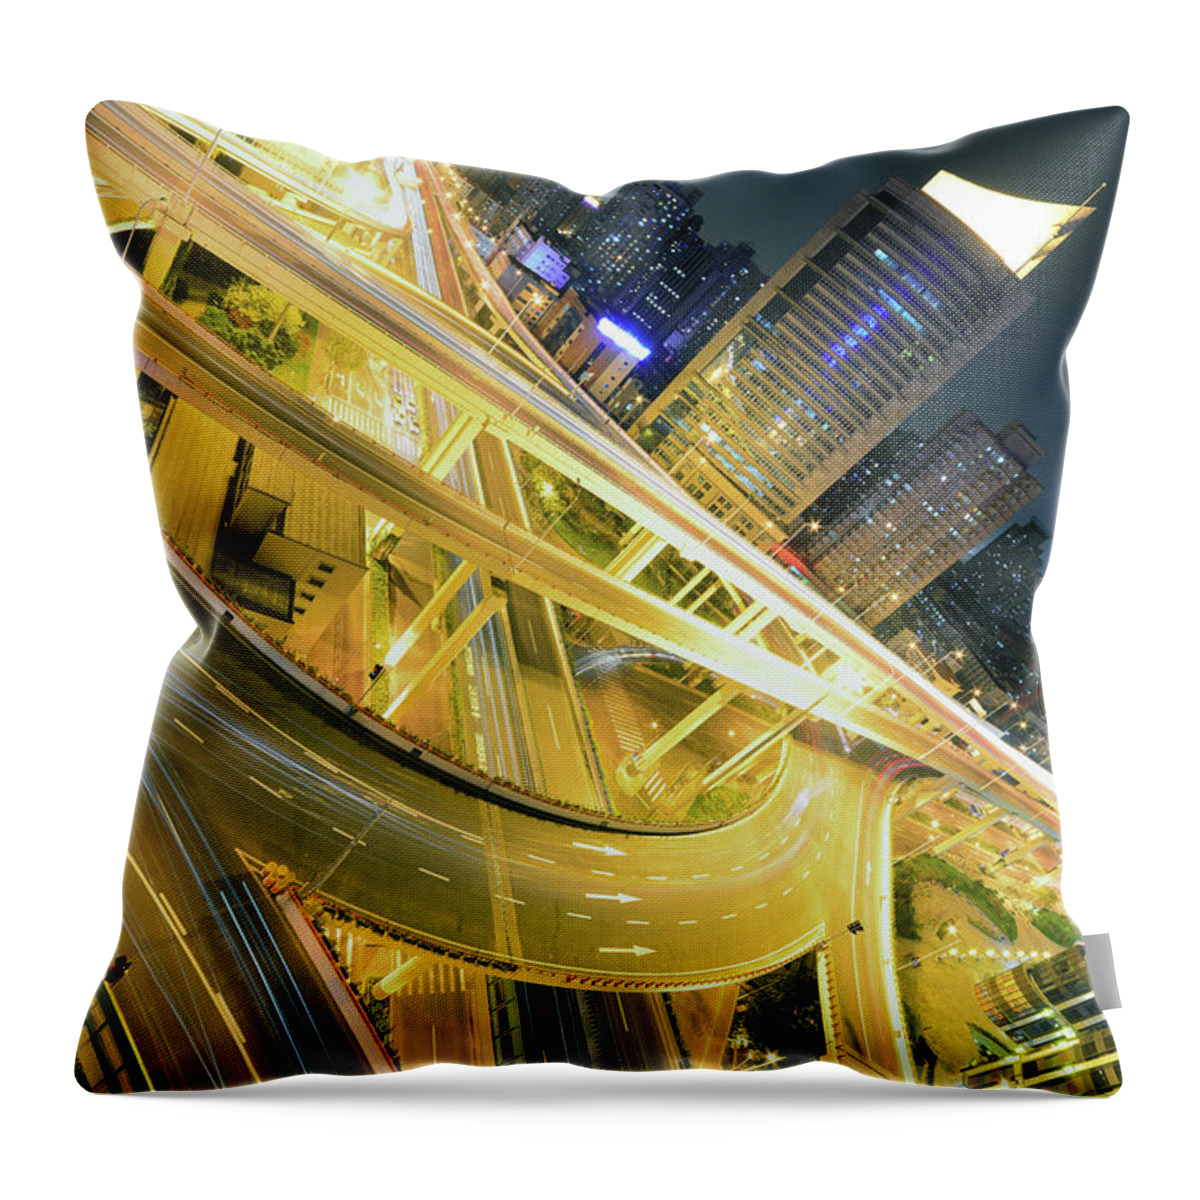 Built Structure Throw Pillow featuring the photograph Intricate Intersection by Wei Fang